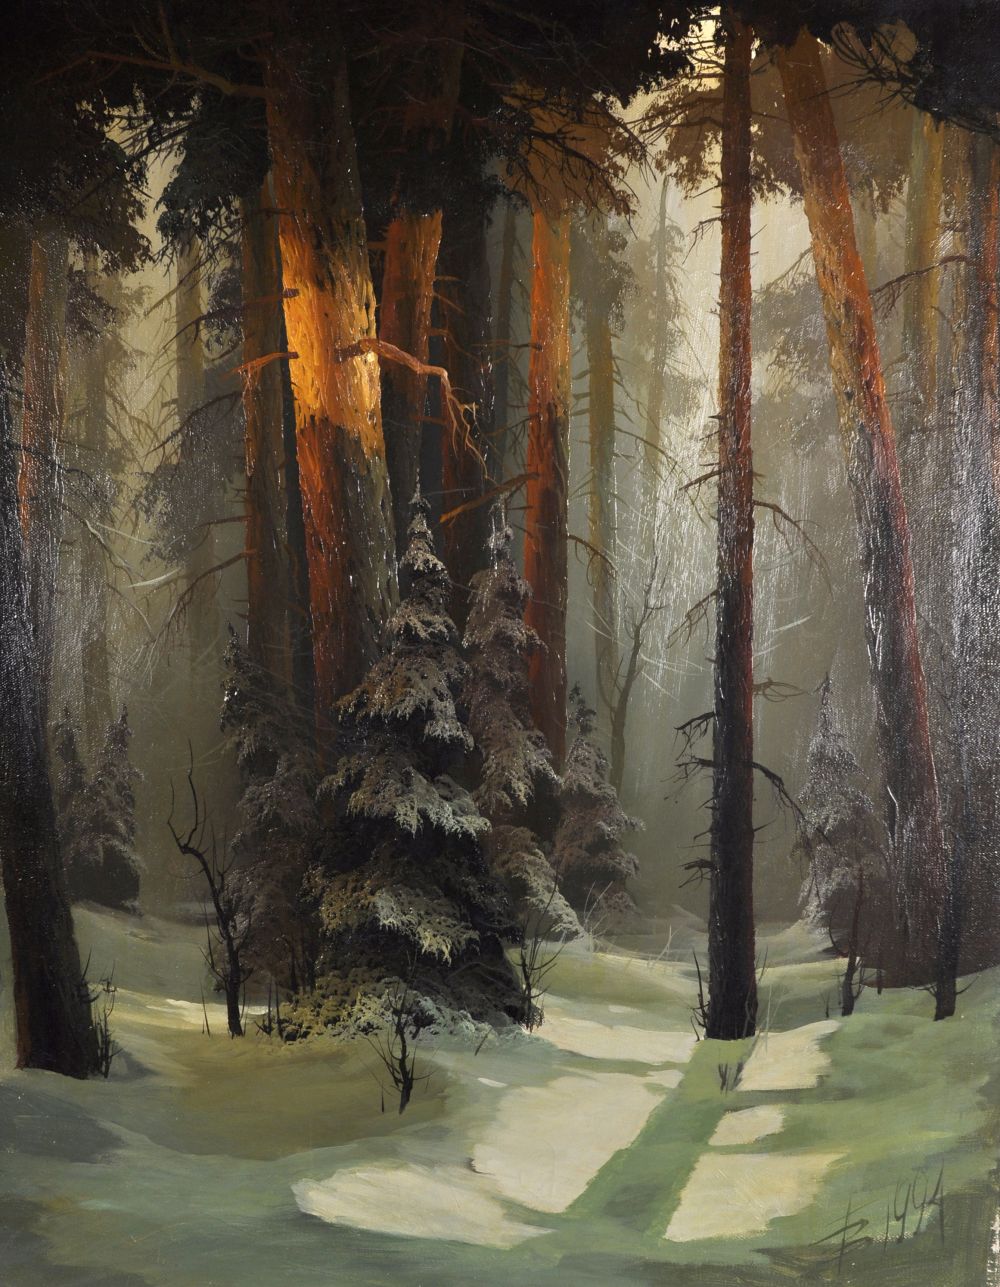 Victor Bykov (1958- ) Russian. "Winter Forest", Oil on Canvas, Signed with Initials and Dated